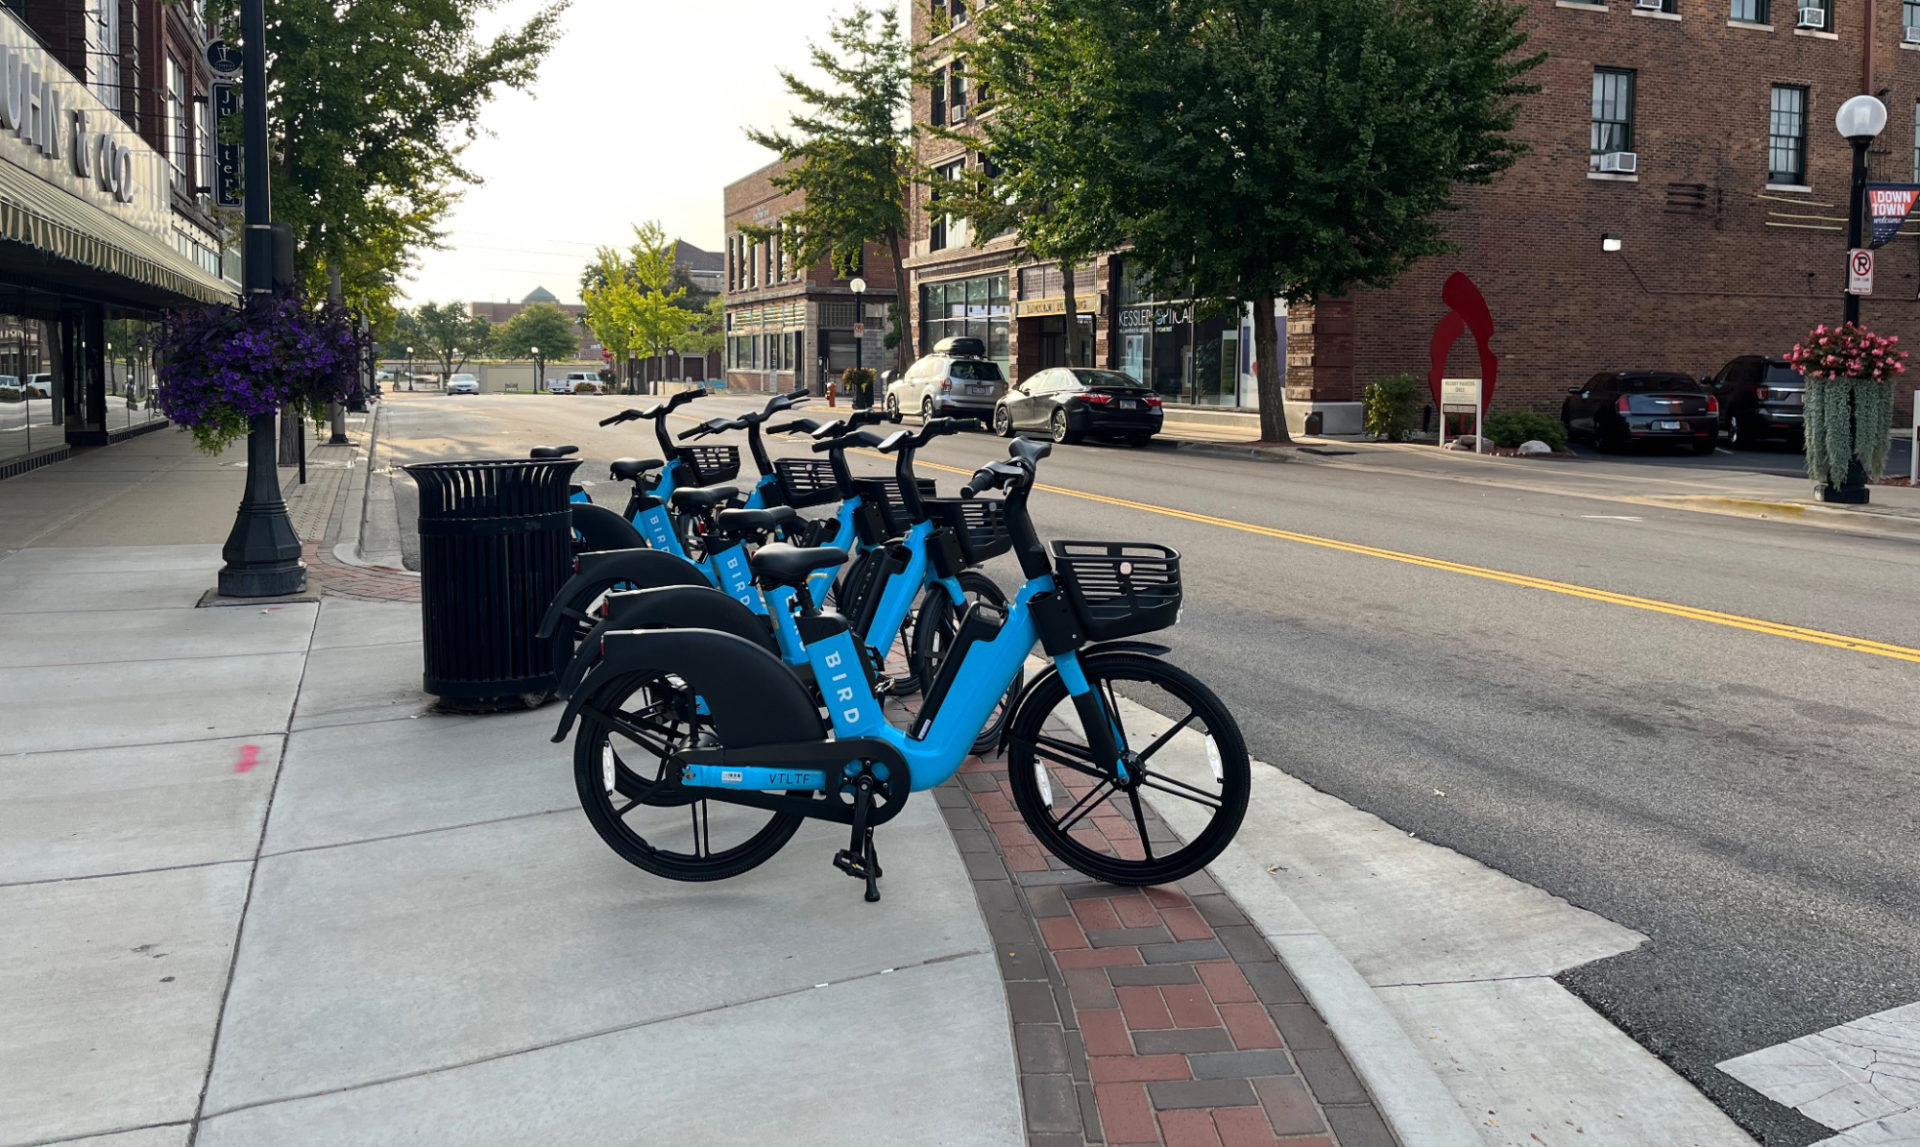 A line of blue and black e-bikes from the company Bird are parked on a street in Downtown Champaign.